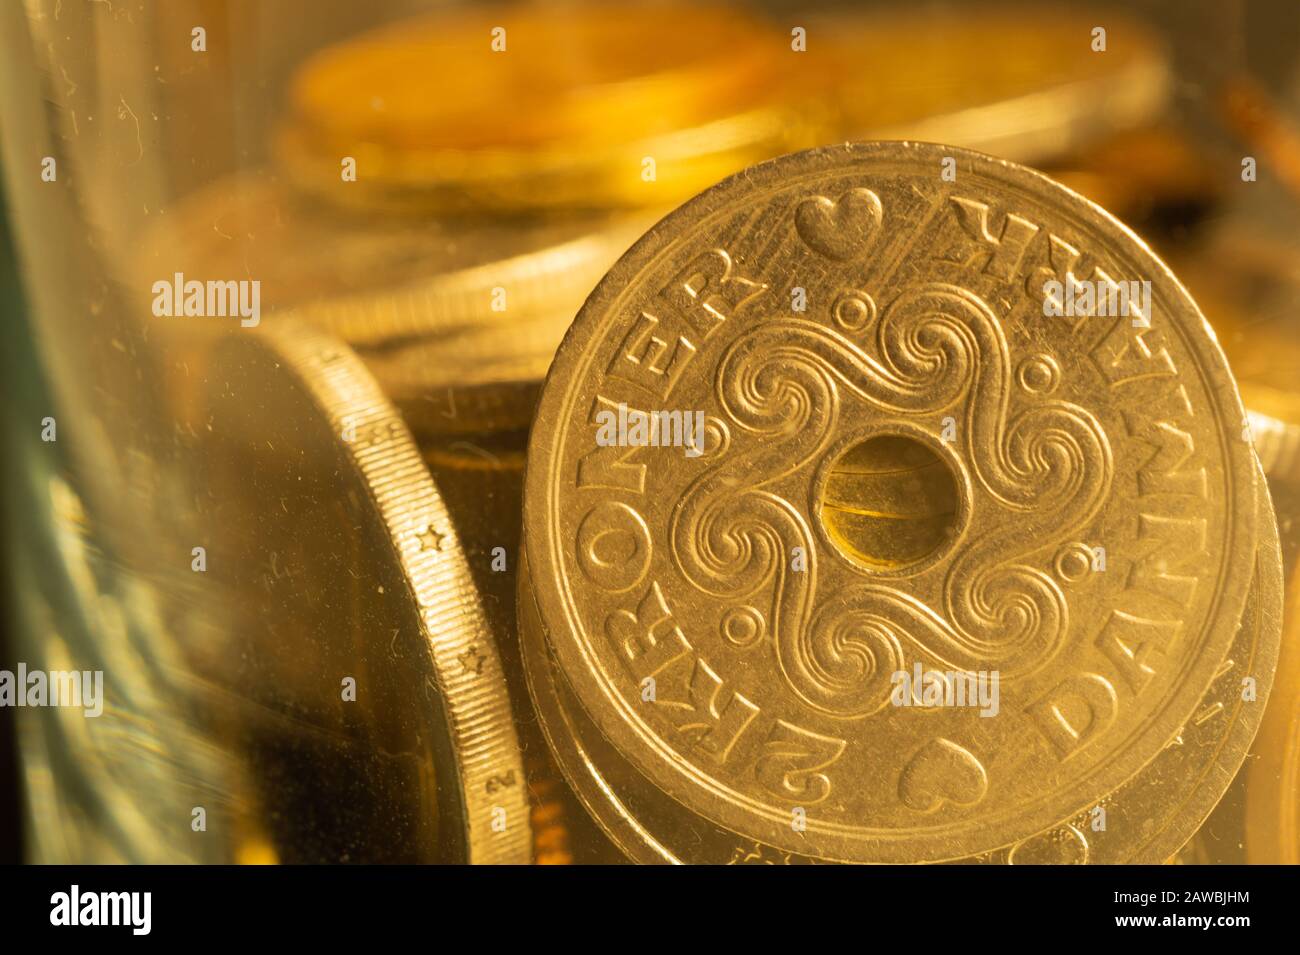 Coins of different countries in a glass jar. a lot of metal coins of different denominations and various countries. financial background. danish krone Stock Photo